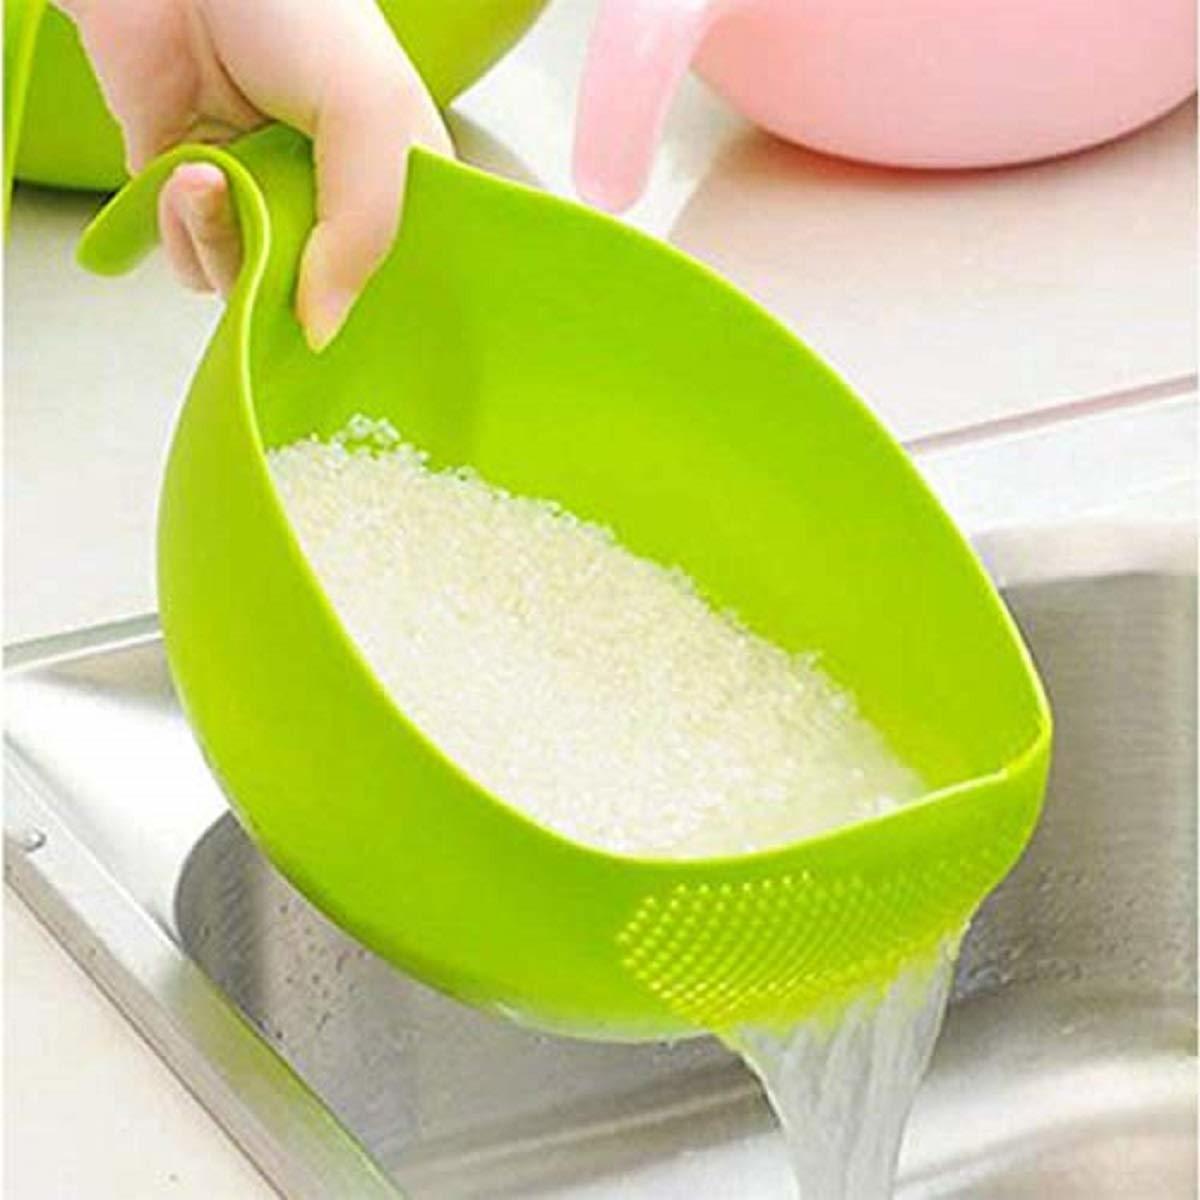 Washing Bowl Strainer for Rice, Fruits and Vegetables